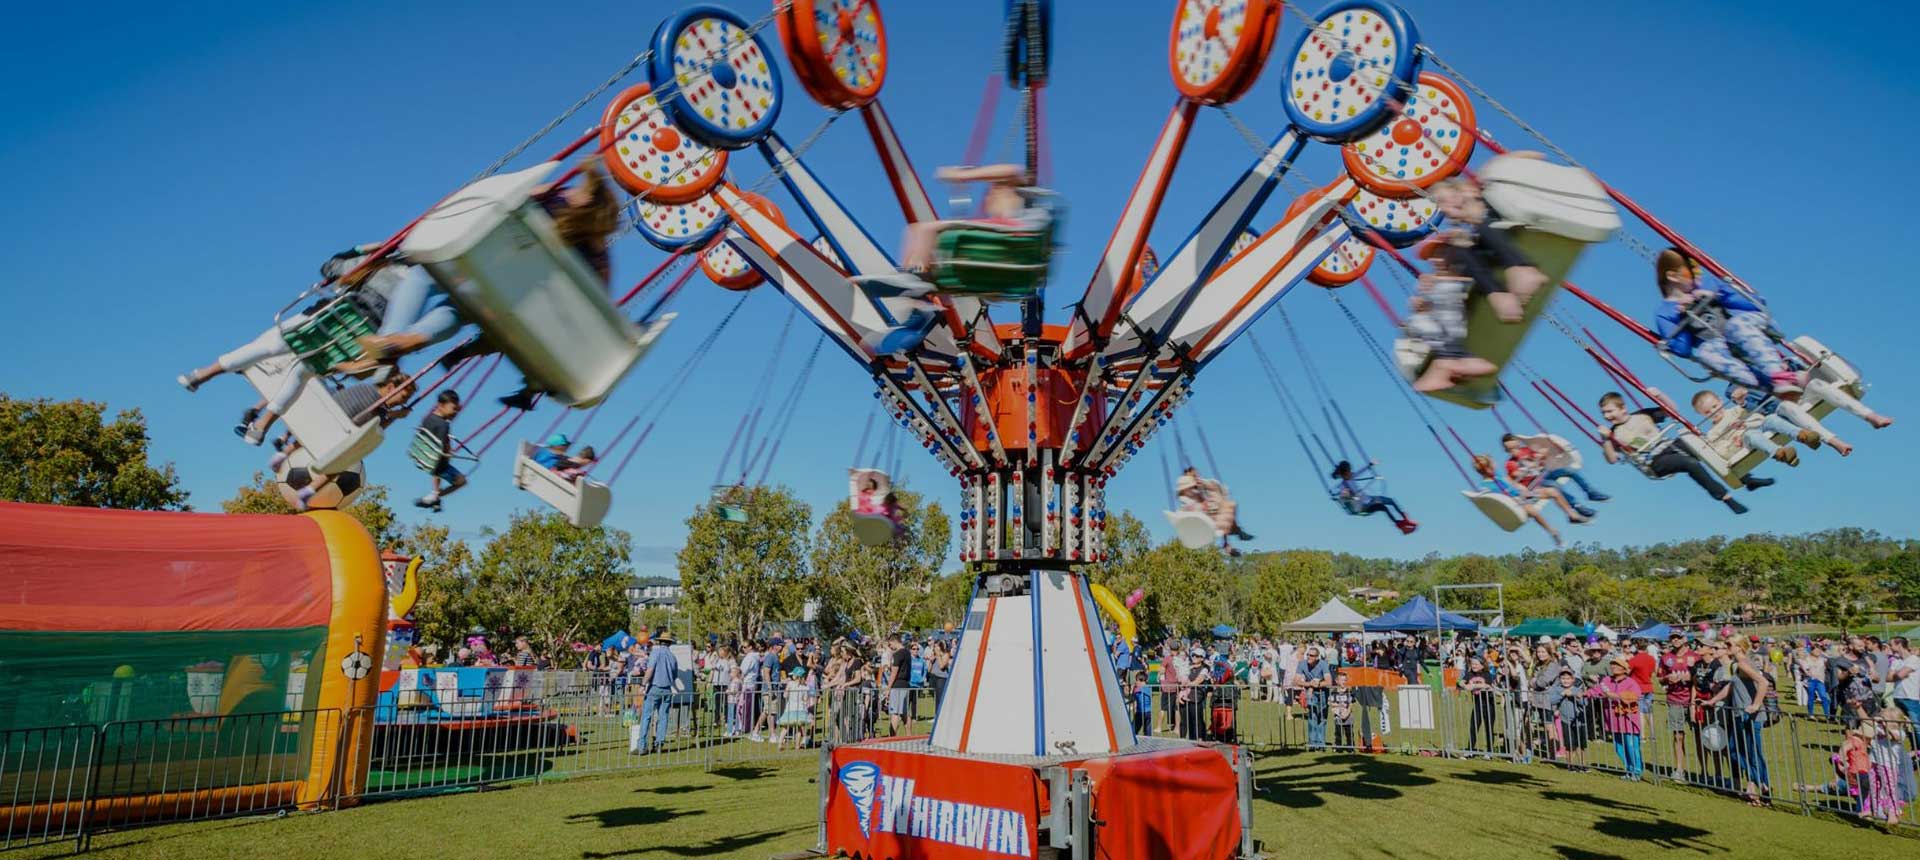 Jubilee Entertainment Whirlwind Ride for hire Brisbane